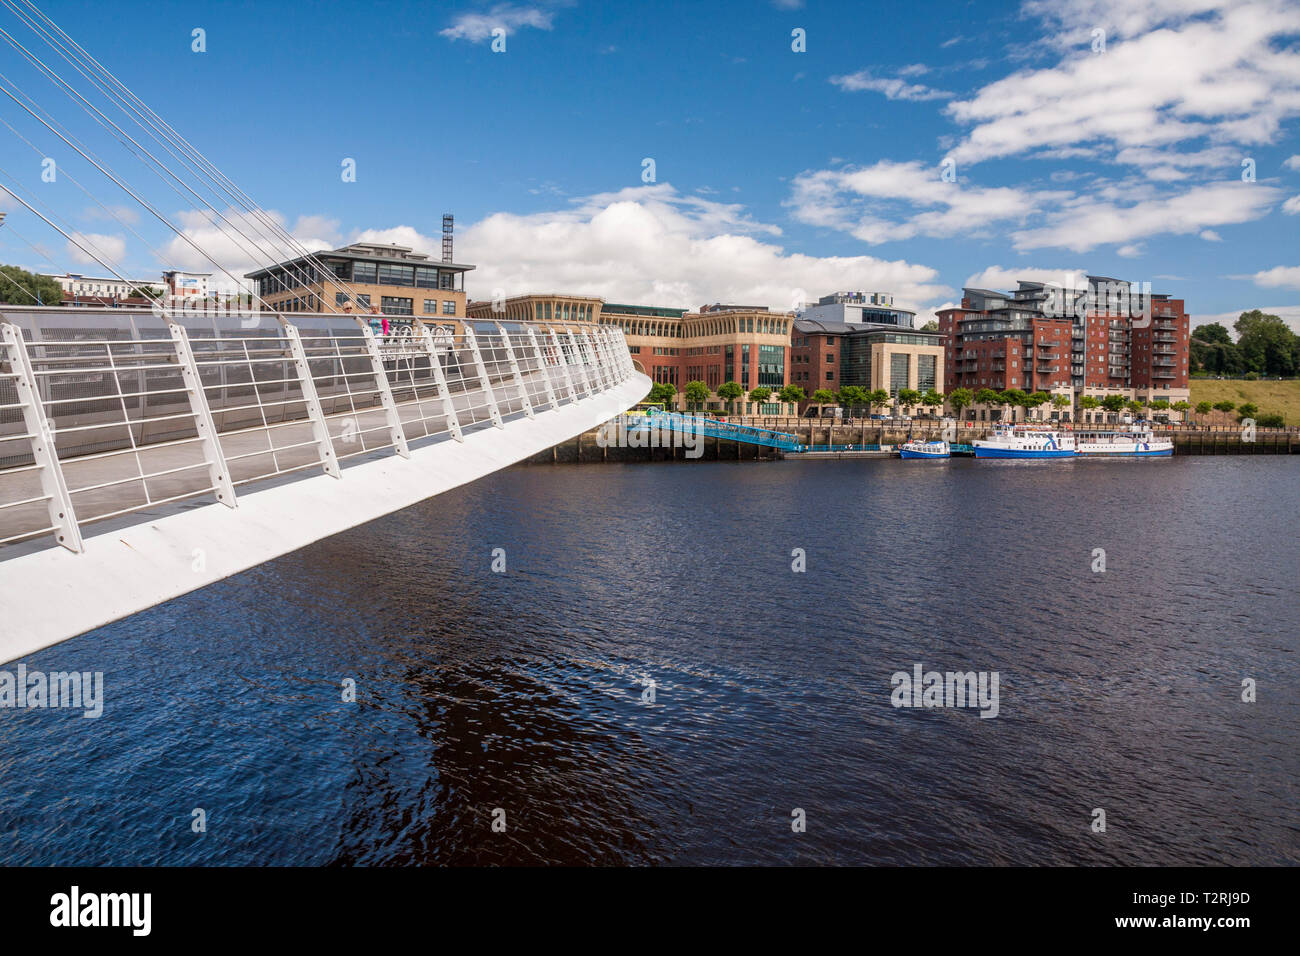 A close up view of the Millenium Bridge at Gateshead crossing the River Tyne in the north east of England Stock Photo